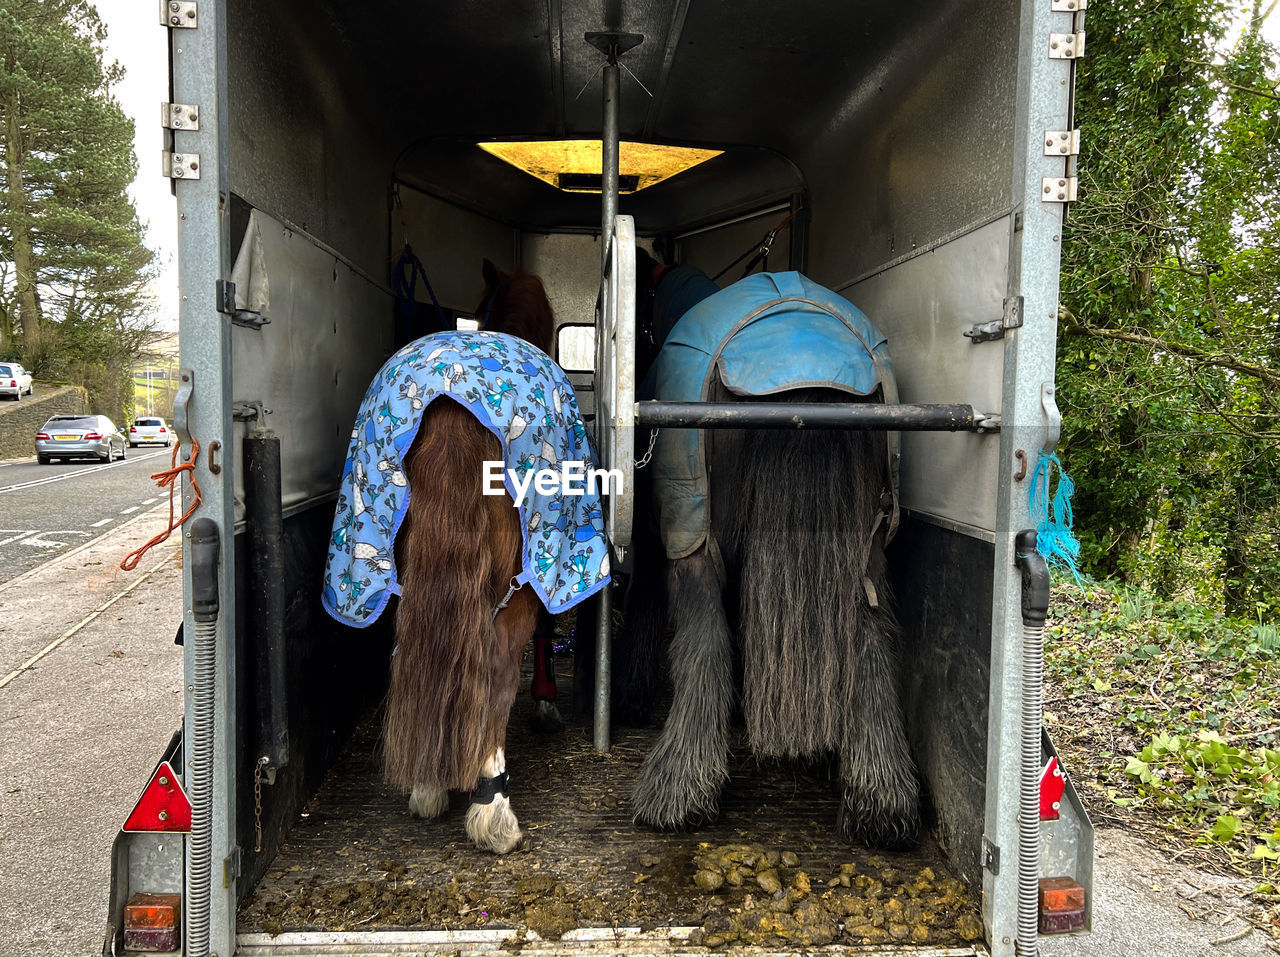 Two horses in a trailer, next to the main, keighley road, haworth, uk